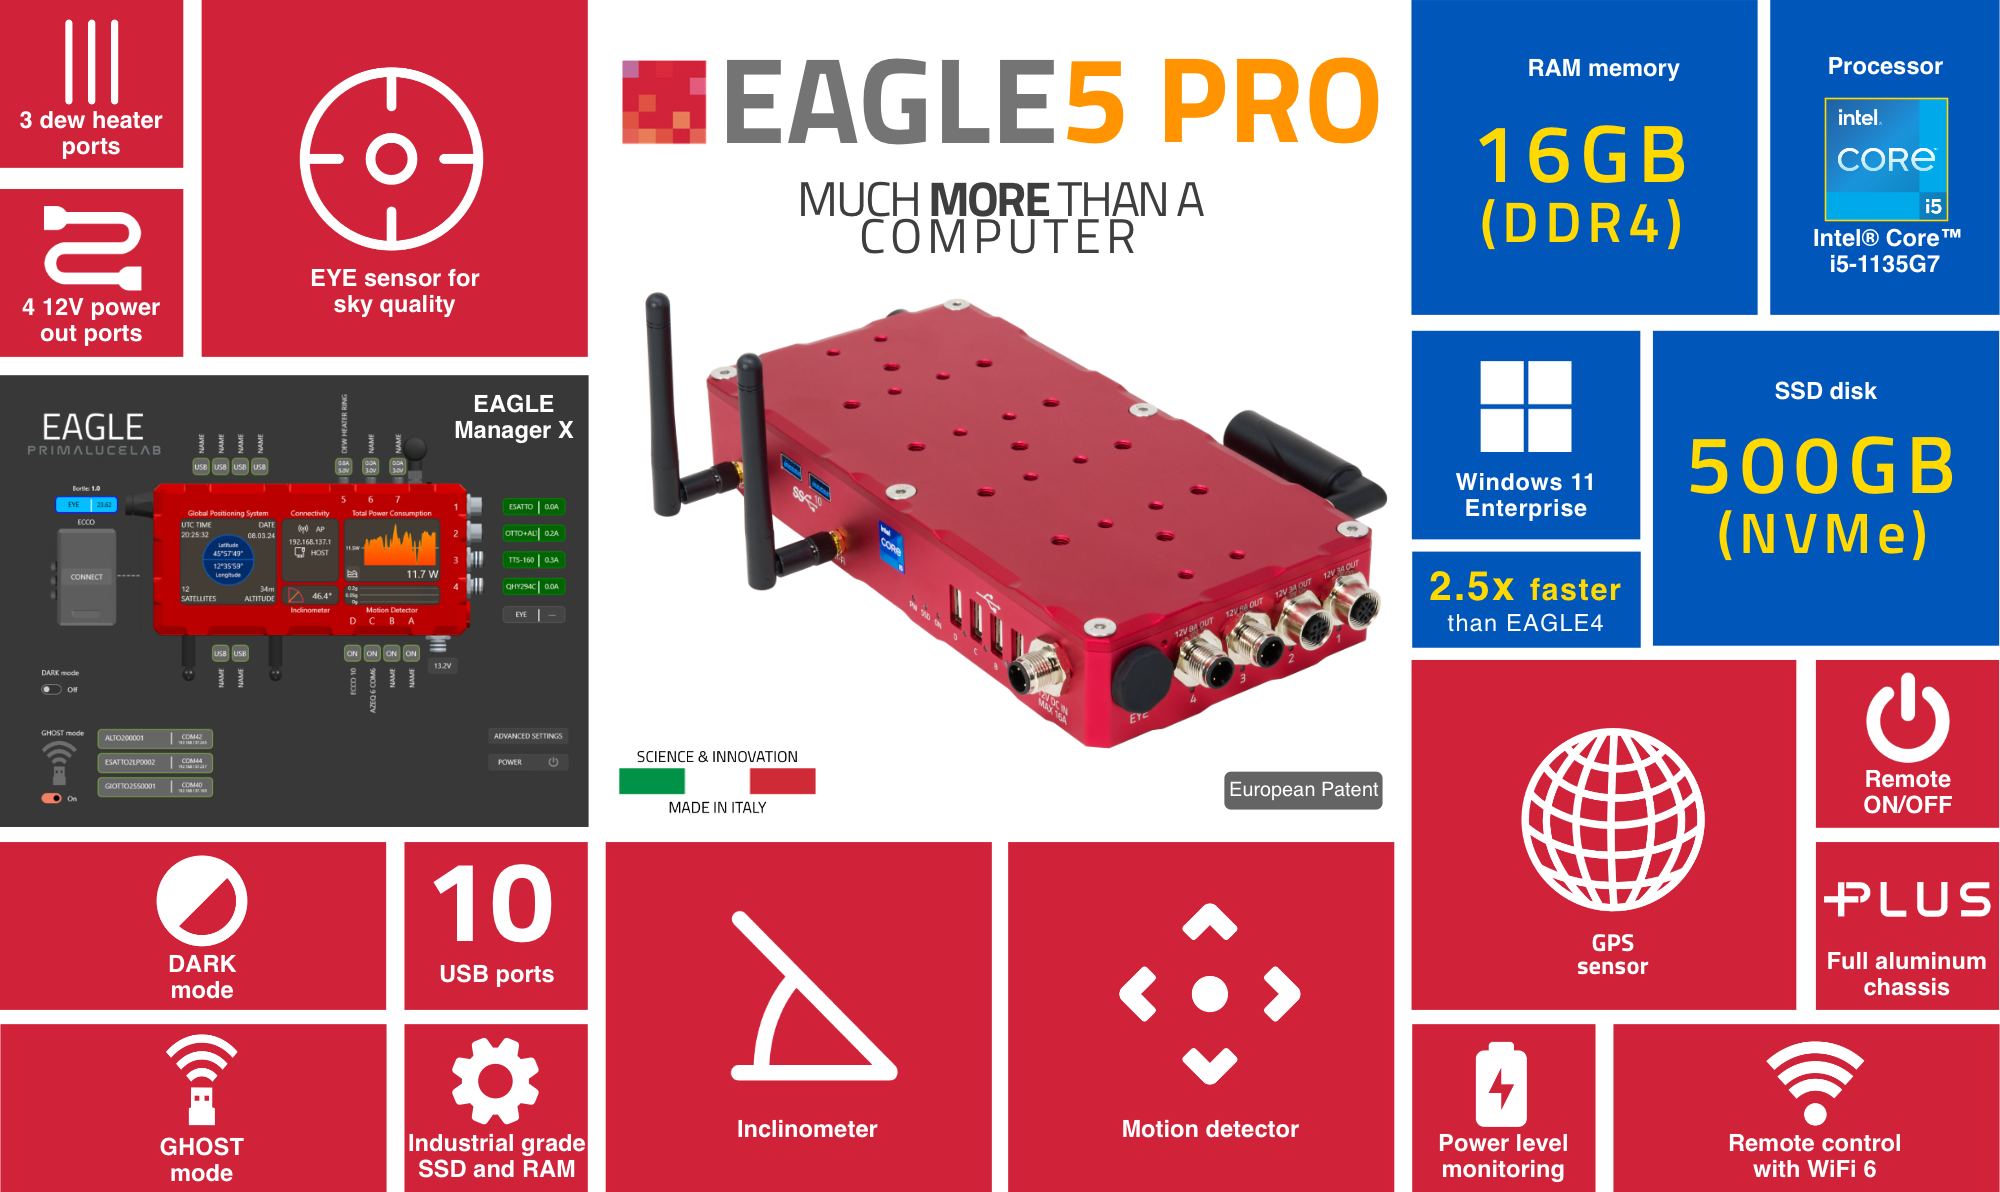 EAGLE5 PRO computer for telescopes and astrophotography